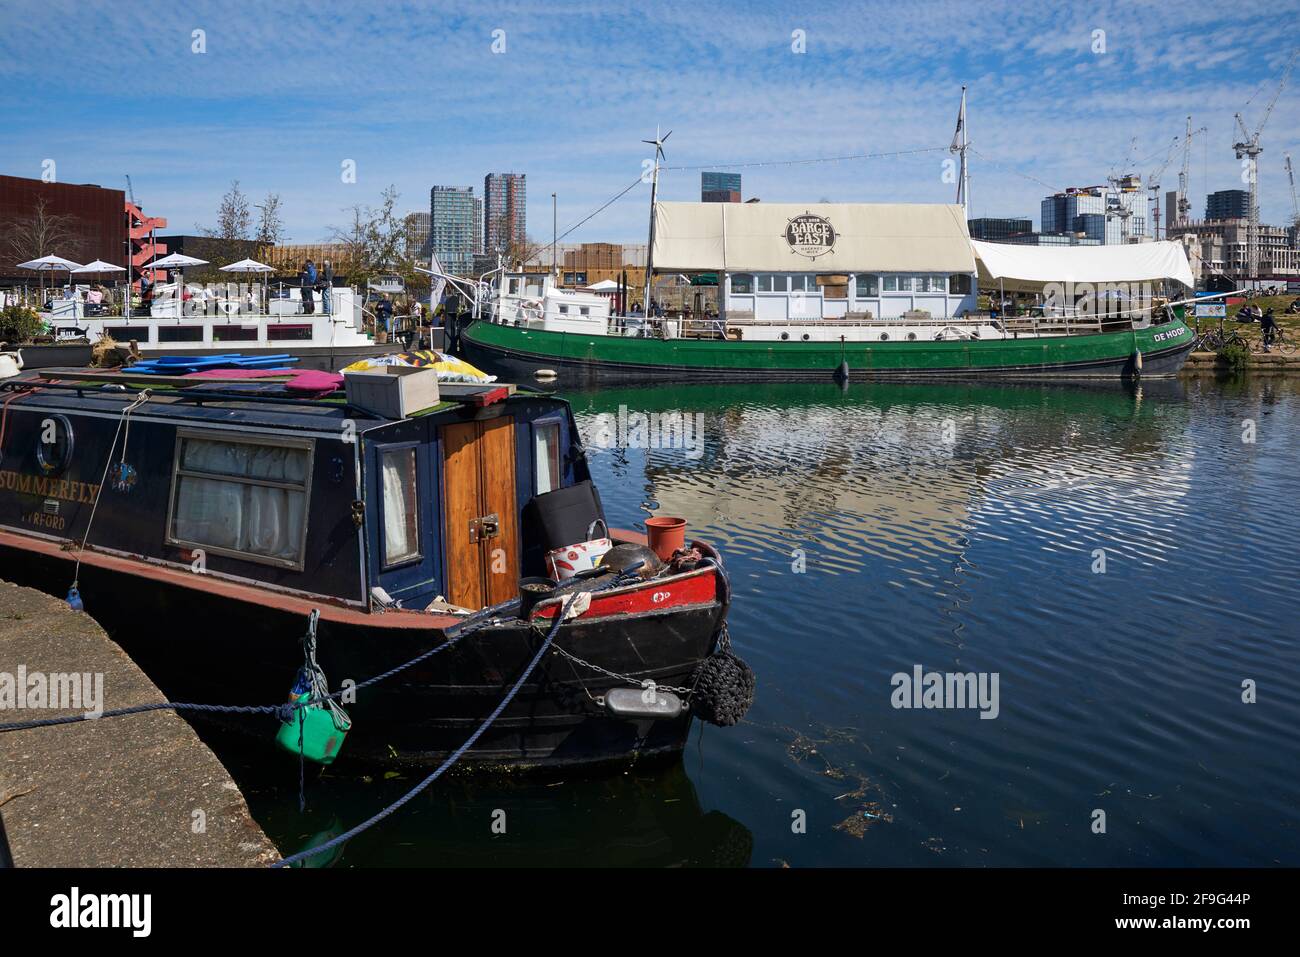 Boats moored on the River Lea Navigation at Hackney Wick, East London Stock Photo